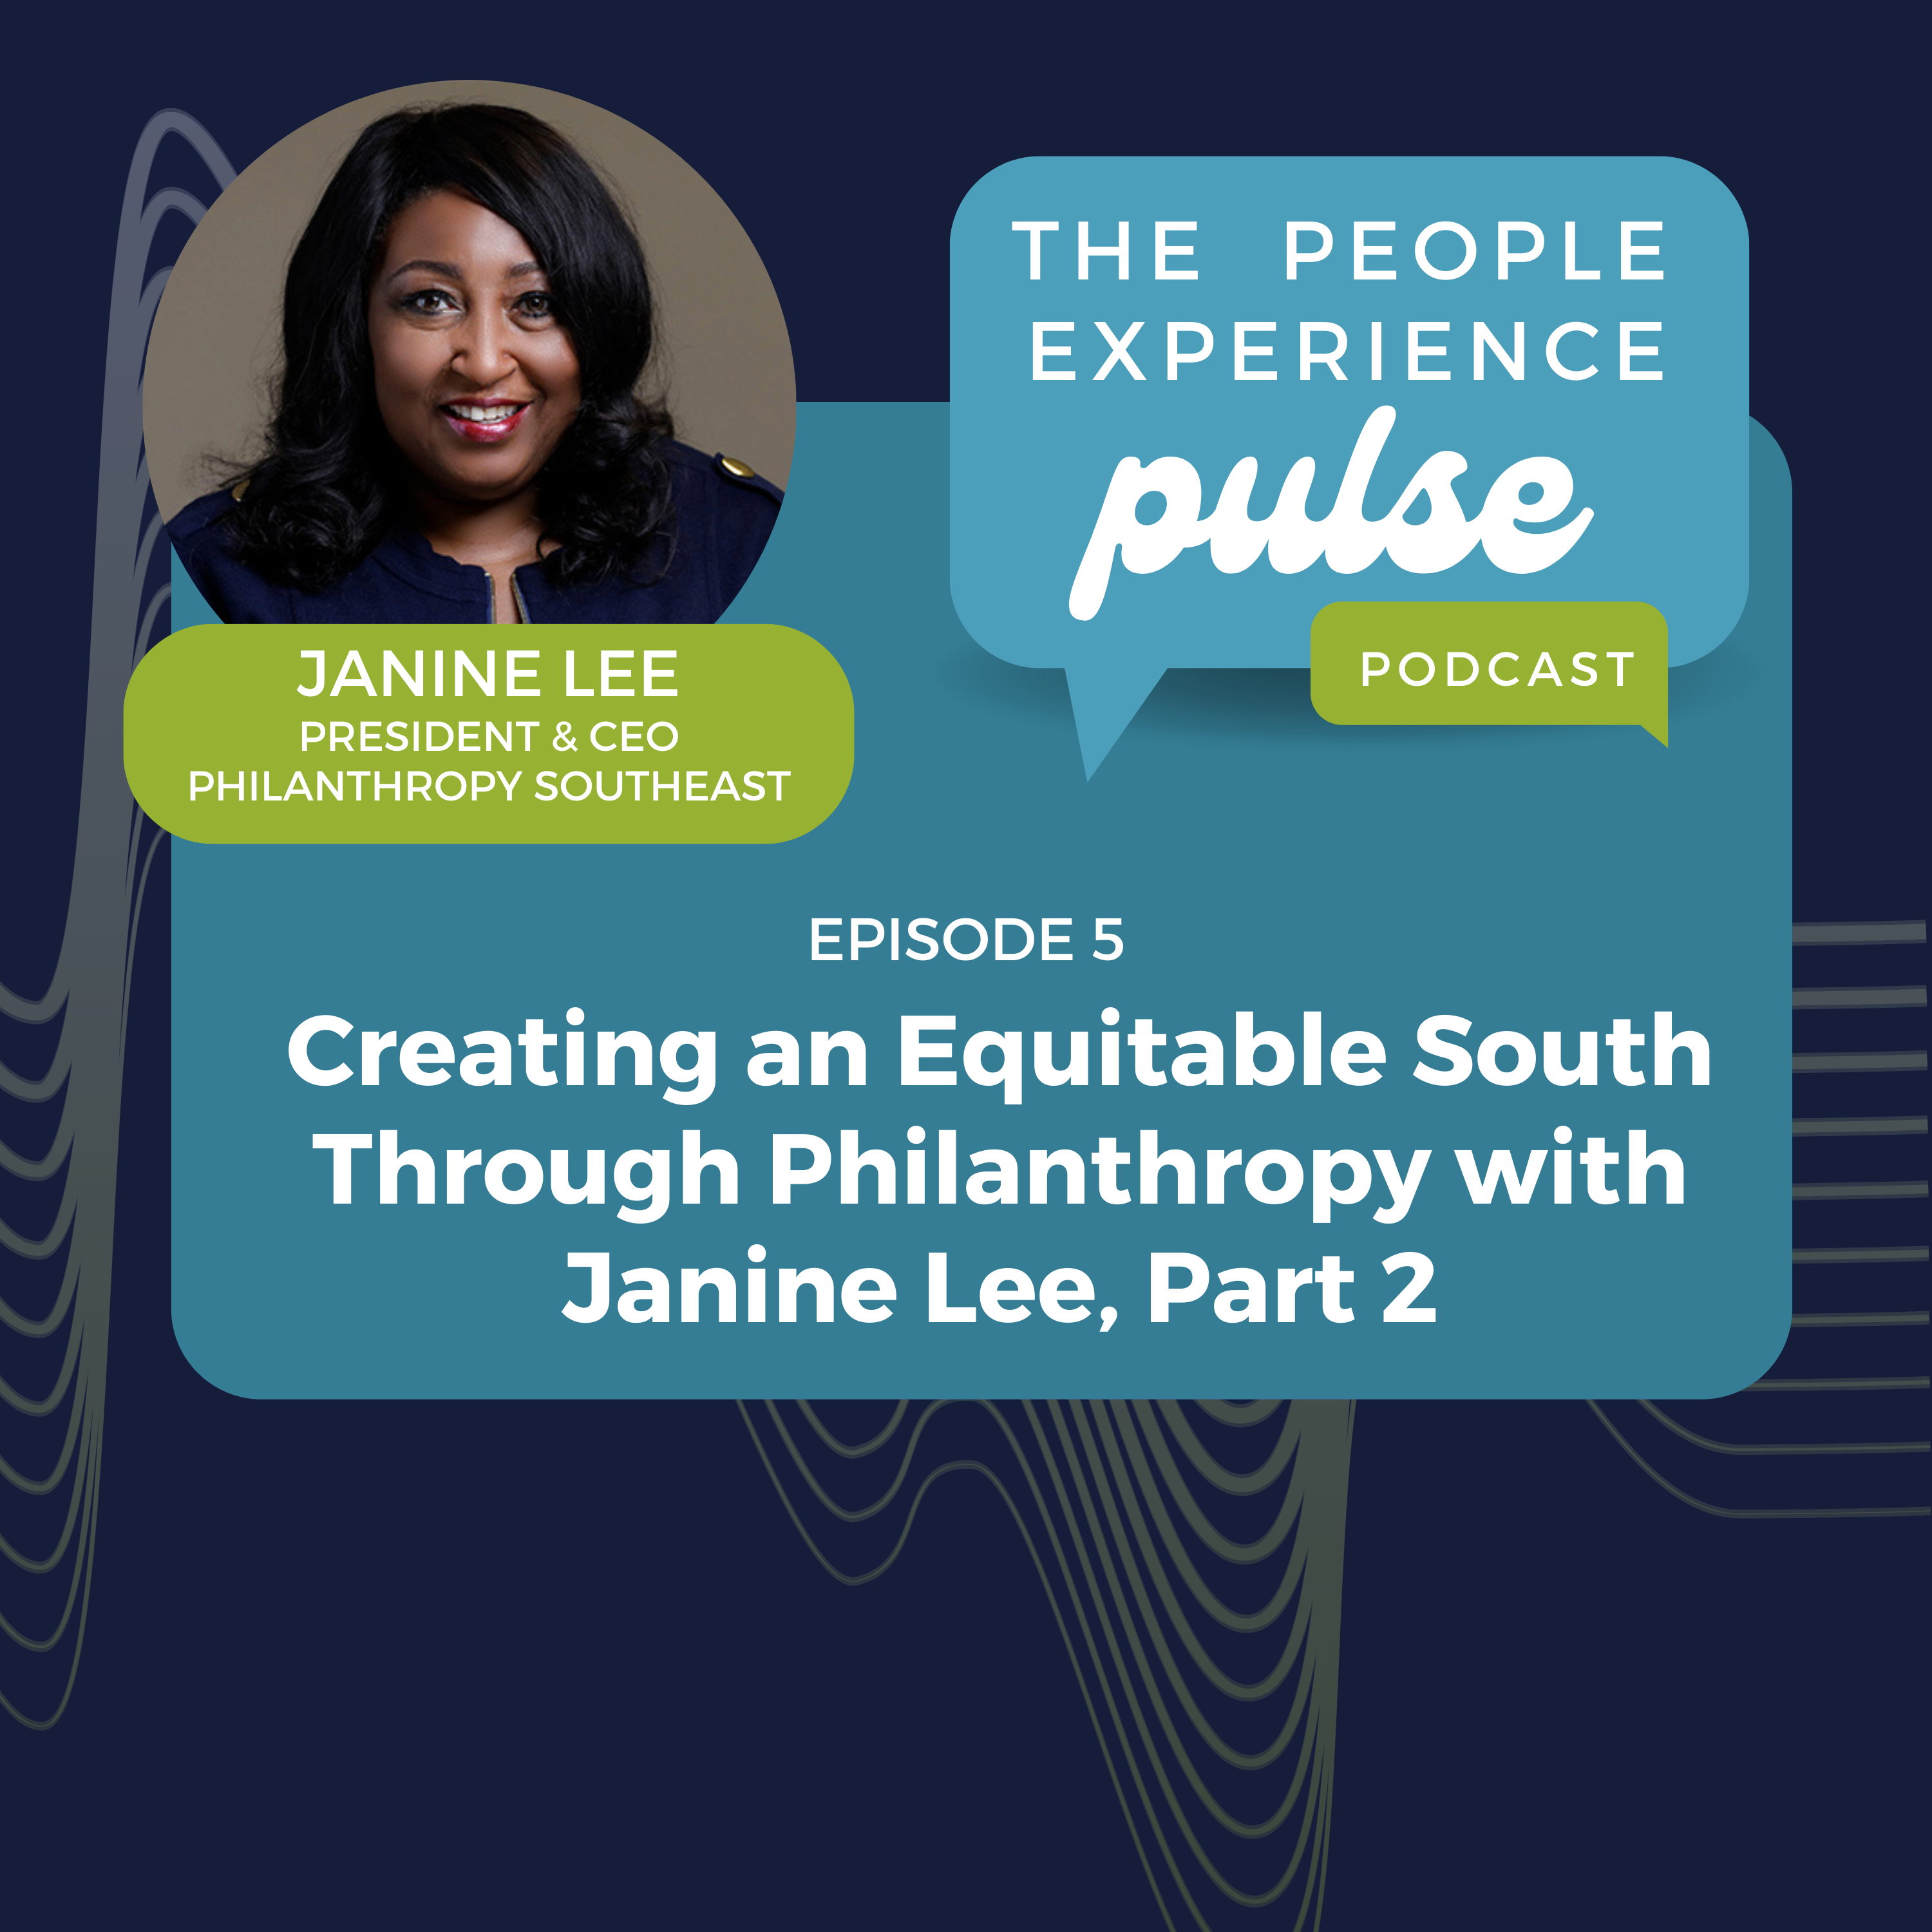 Creating an Equitable South Through Philanthropy with Janine Lee, Part 2